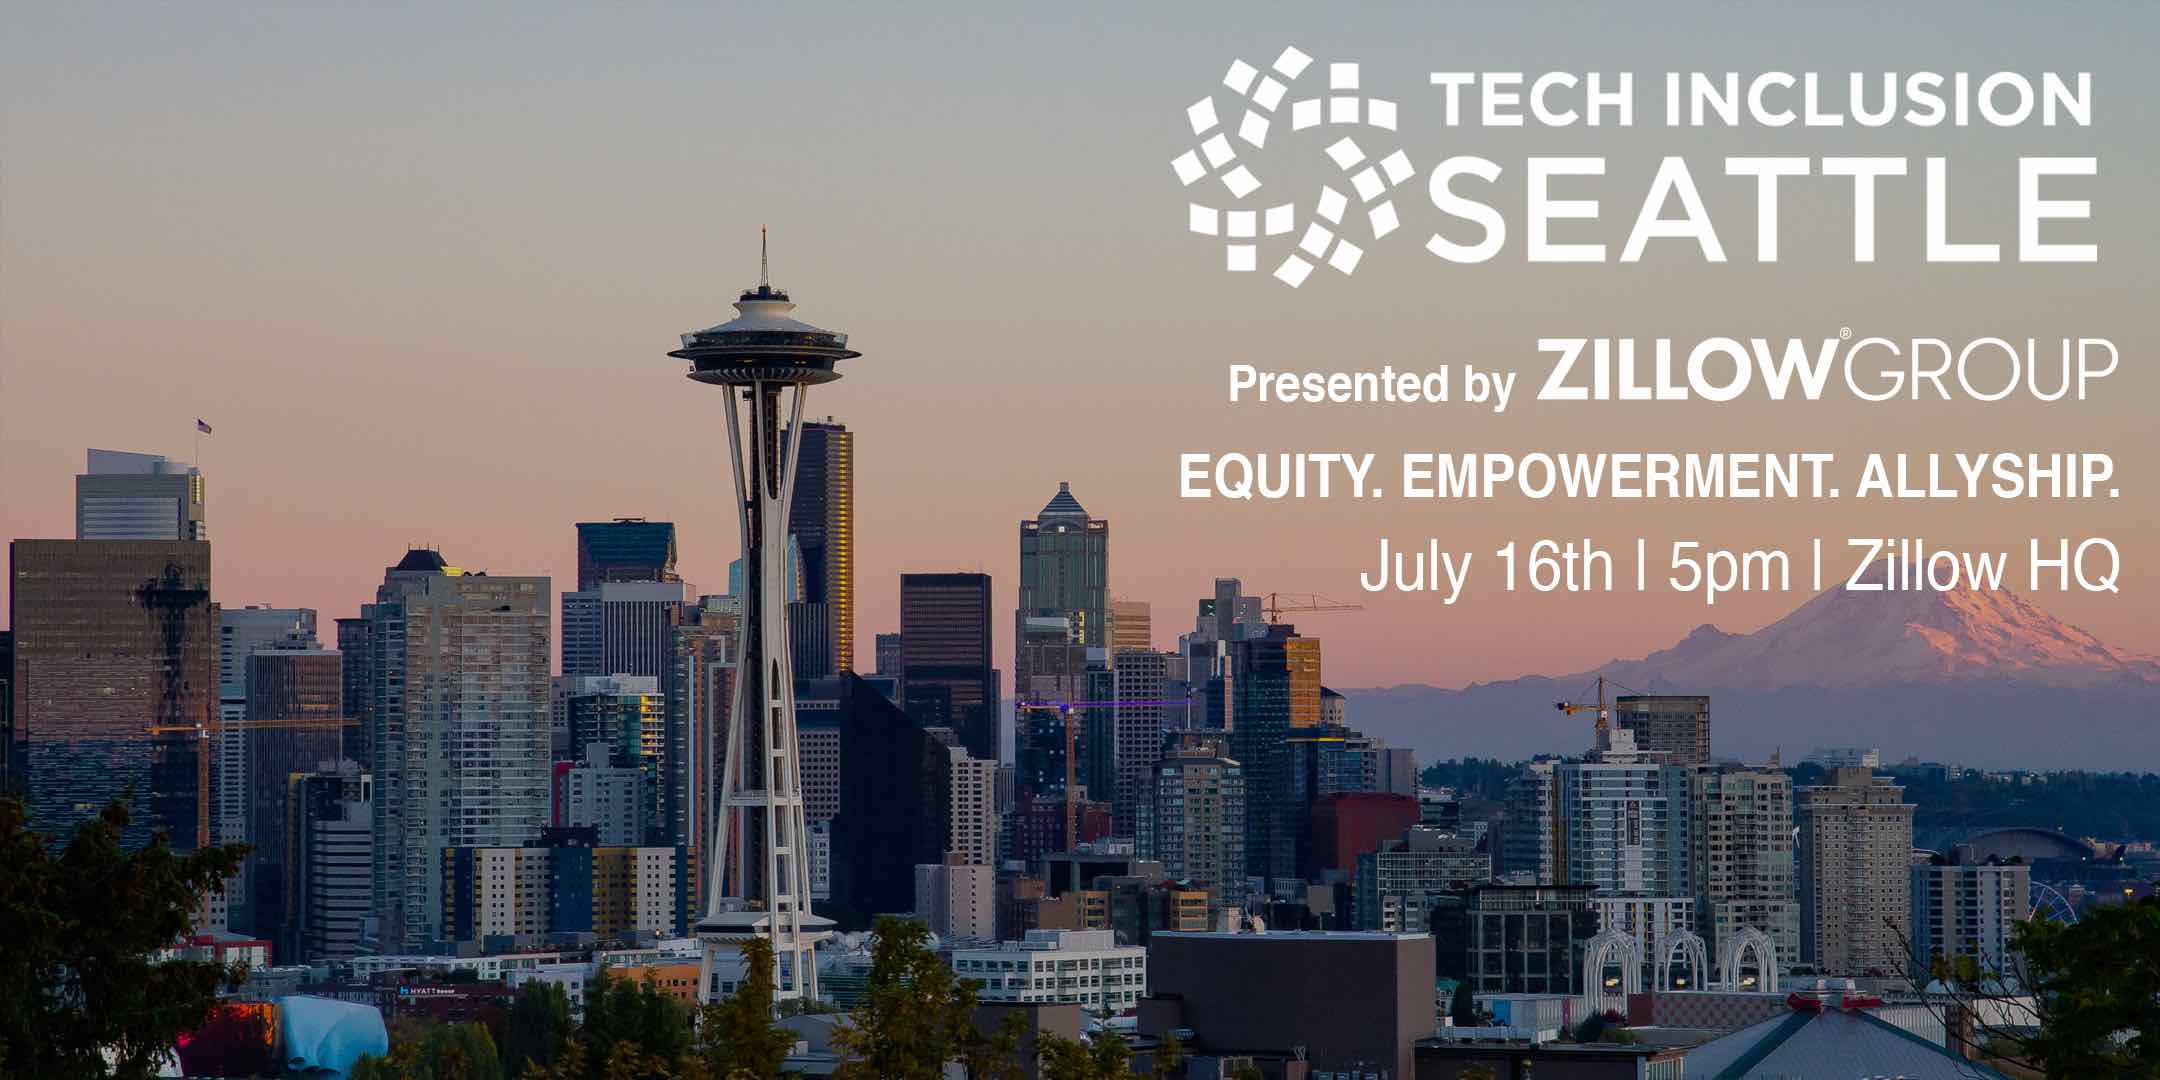 Tech Inclusion Seattle, presented by Zillow Group. Equity. Empowerment. Allyship. July 16th, 5pm, Zillow HQ.